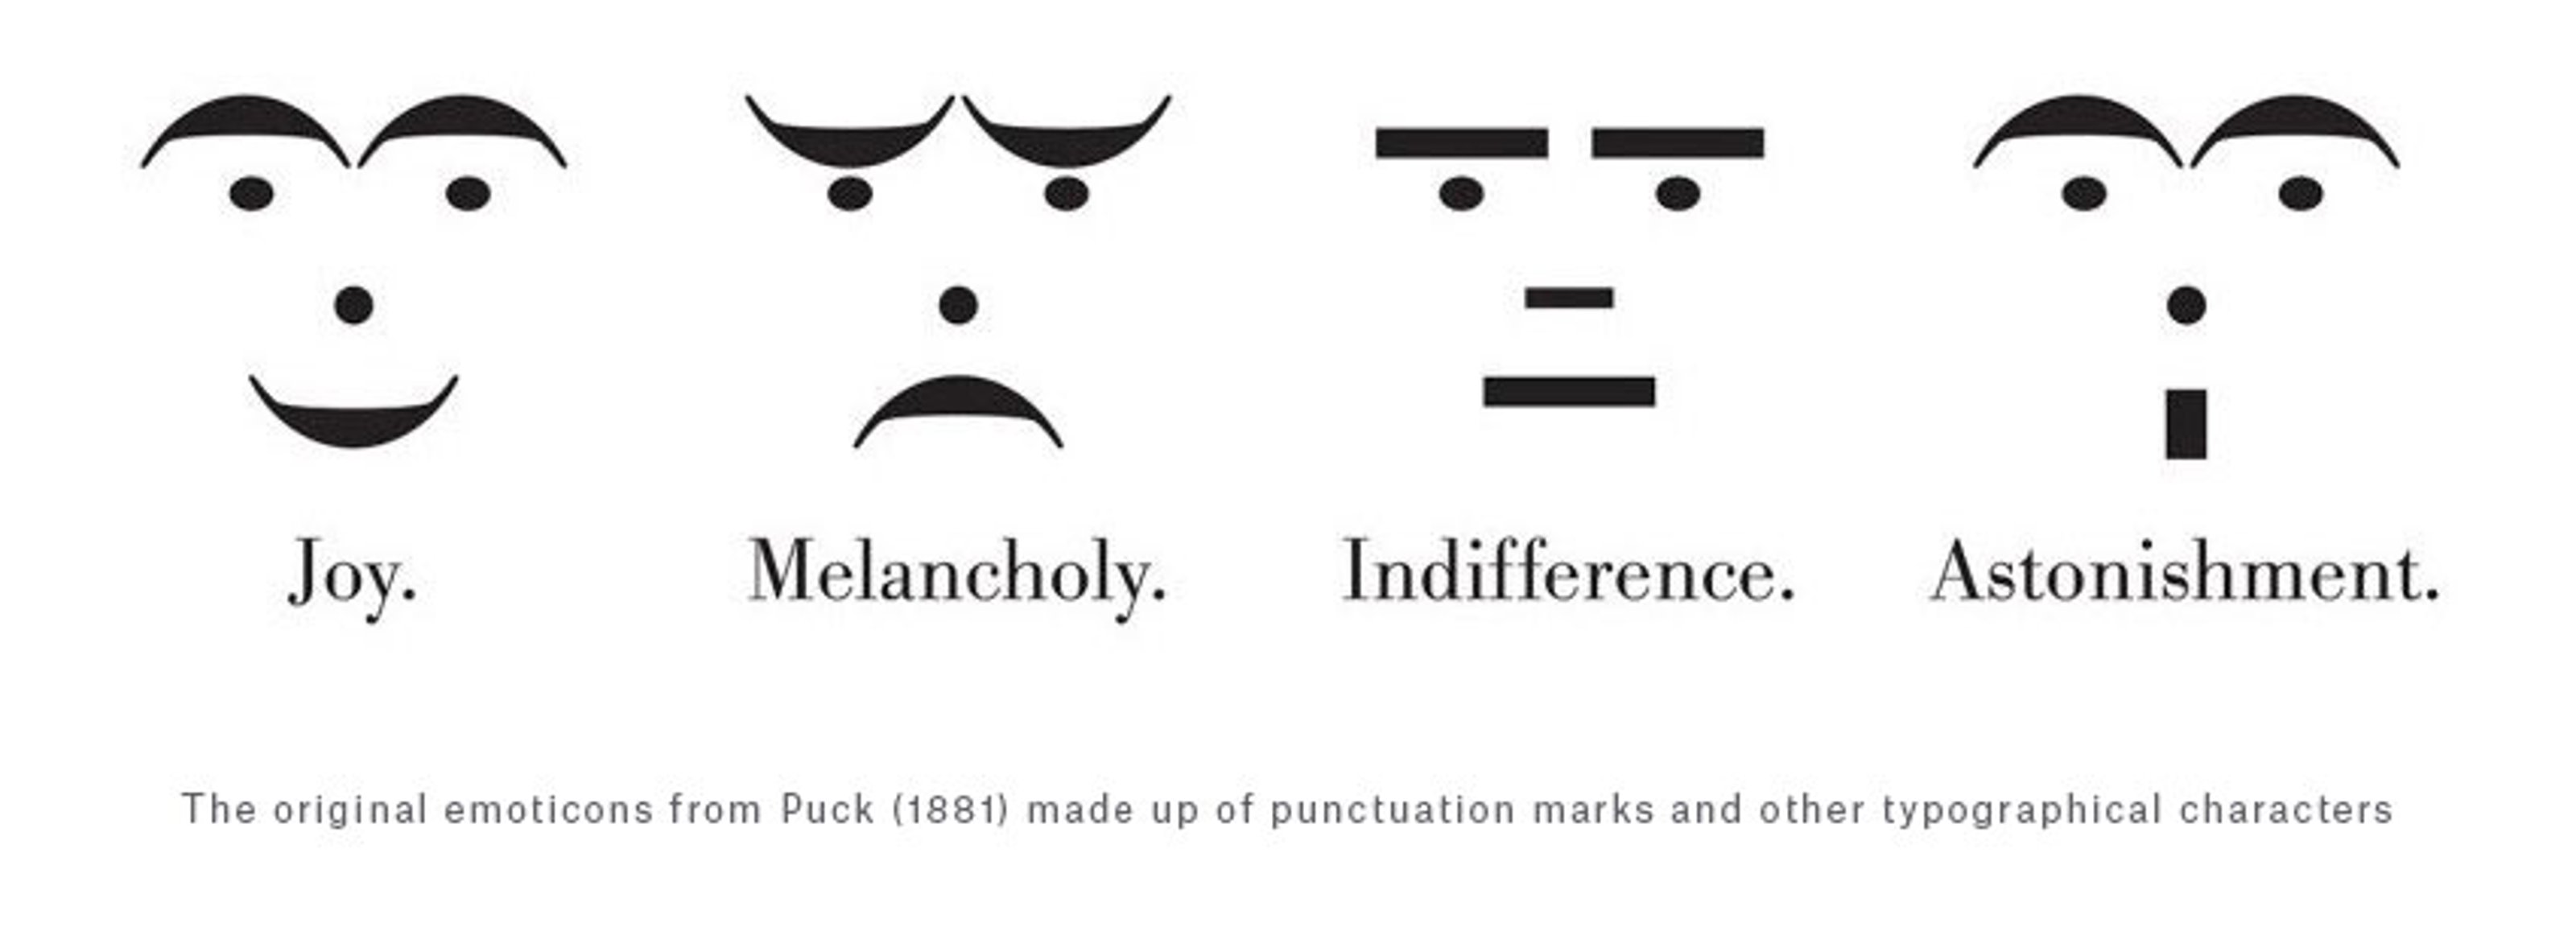 The original emoticons from Puck magazine's 1881 issue made up of punctuation marks and other typographical characters conveying joy, melancholy, indifference, and astonishment.